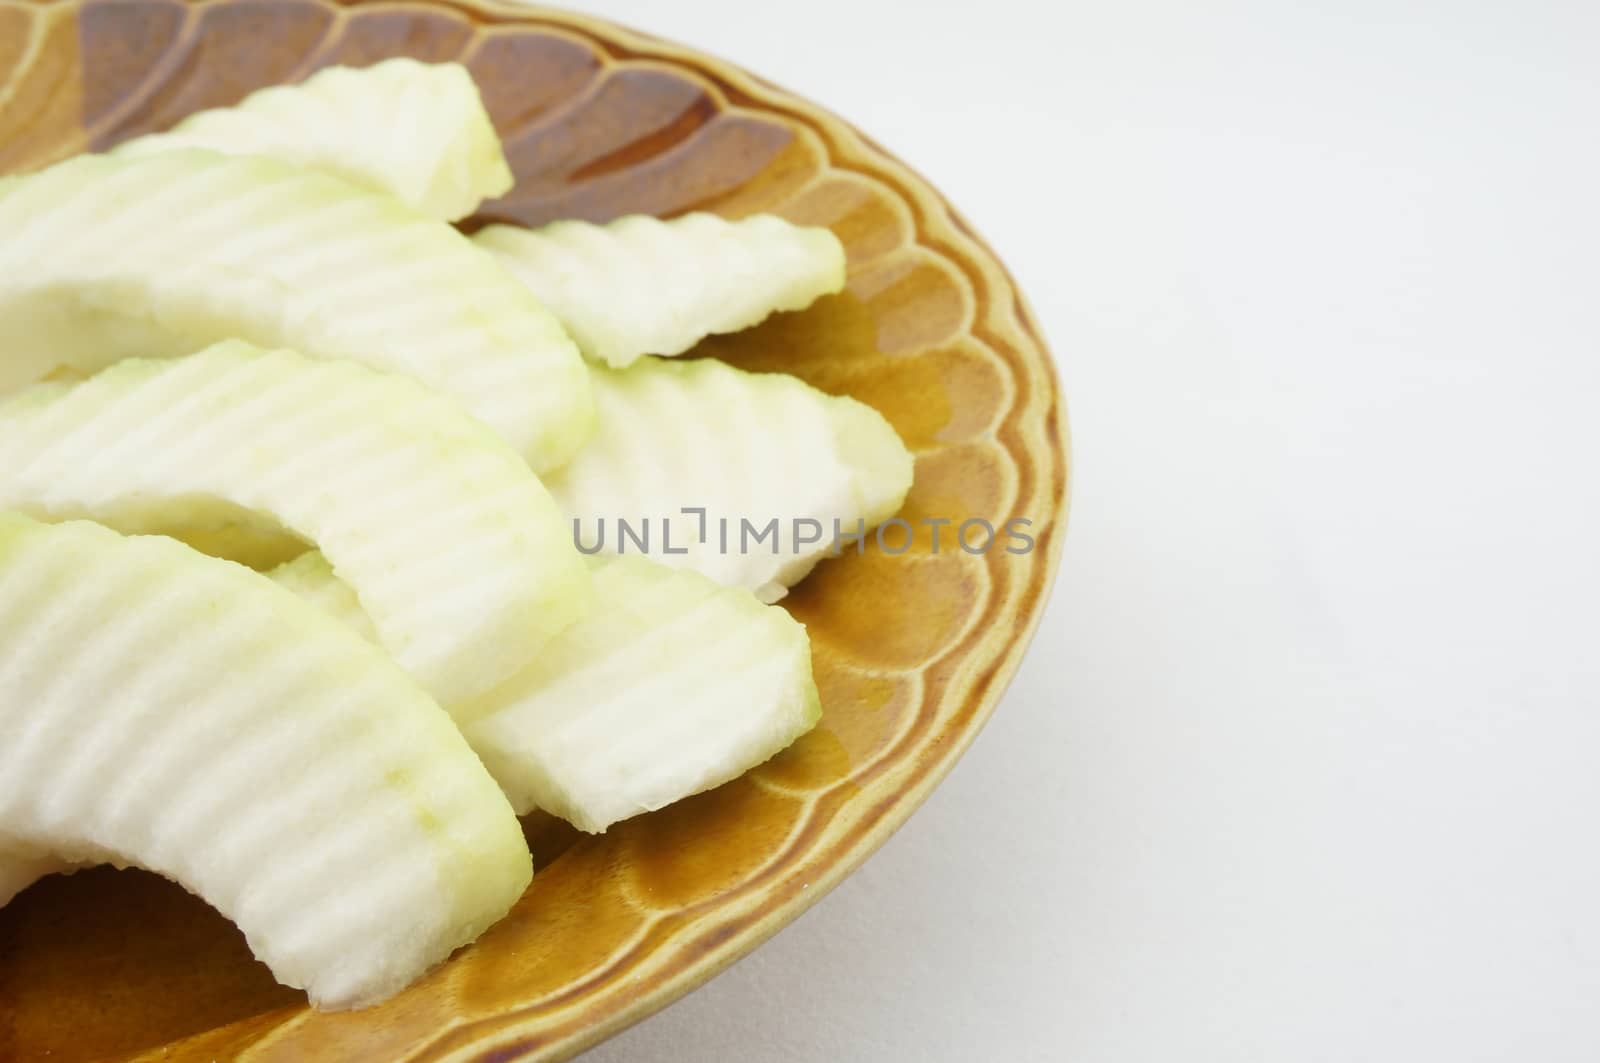 Sliced guava on the plate Brown with white background for diet.